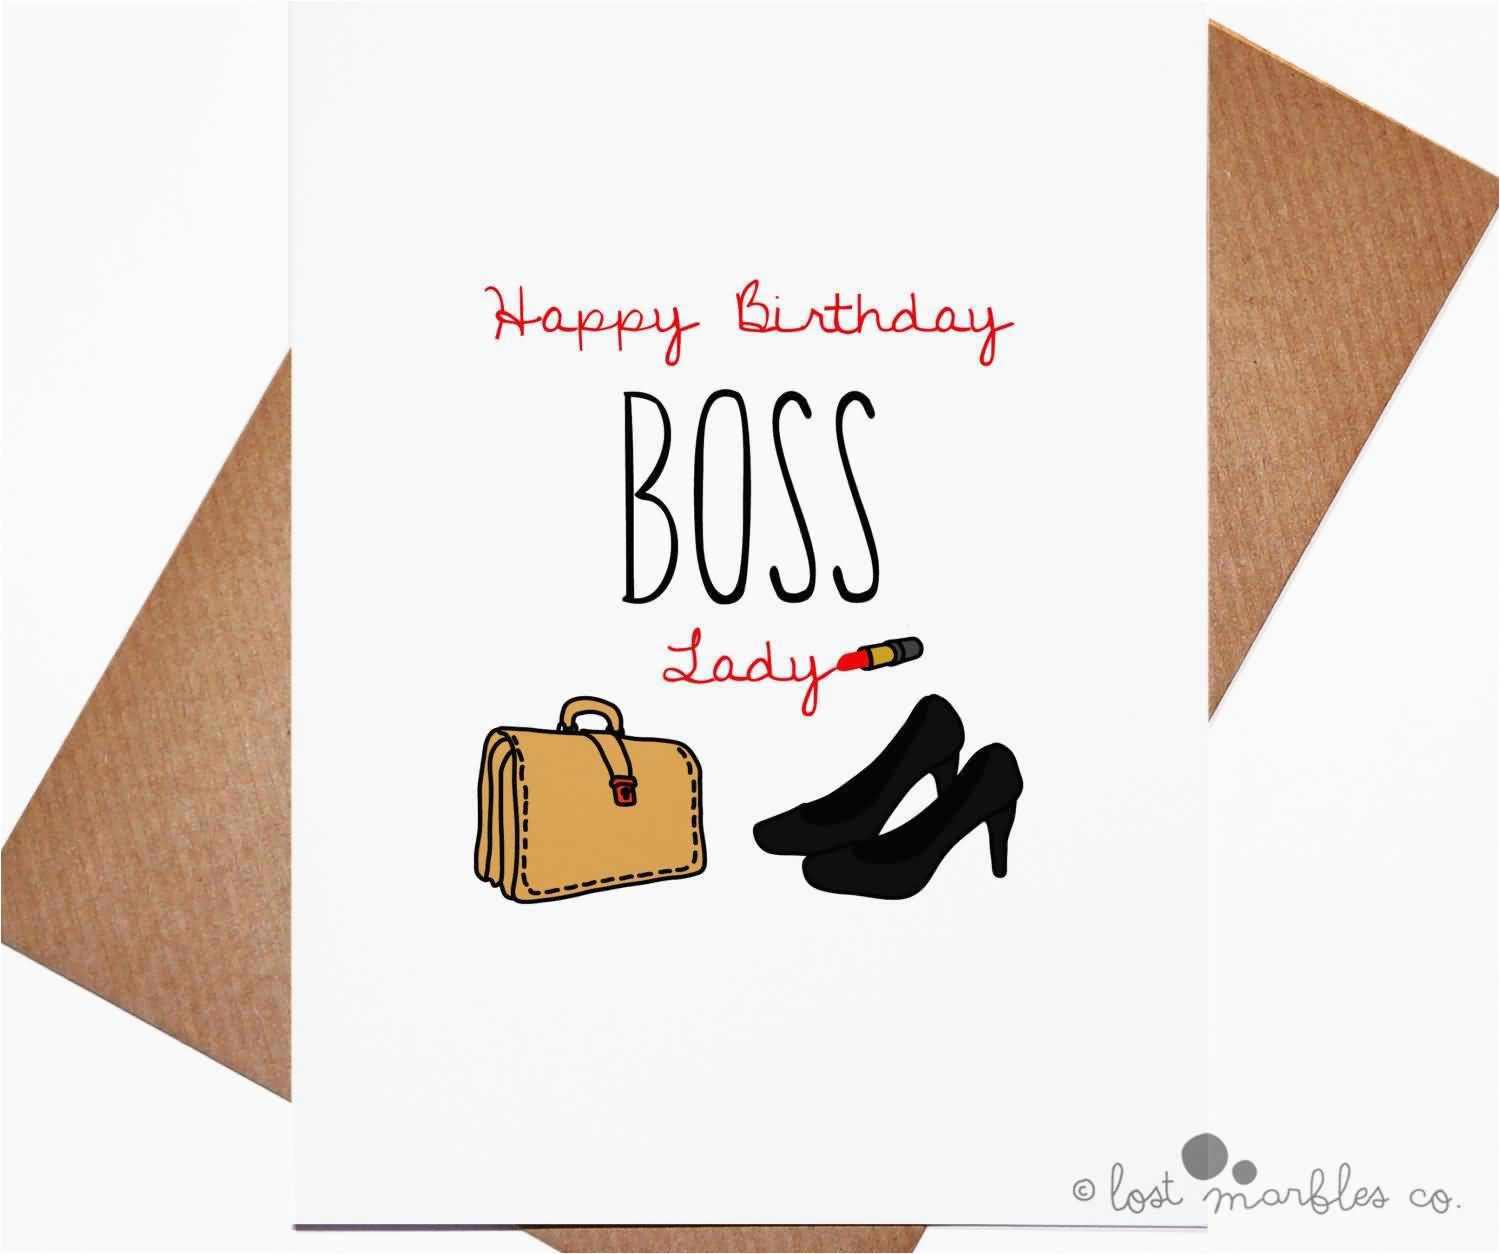 Birthday Cards For Boss Funny Birthday Wishes For Boss Nicewishes Com 